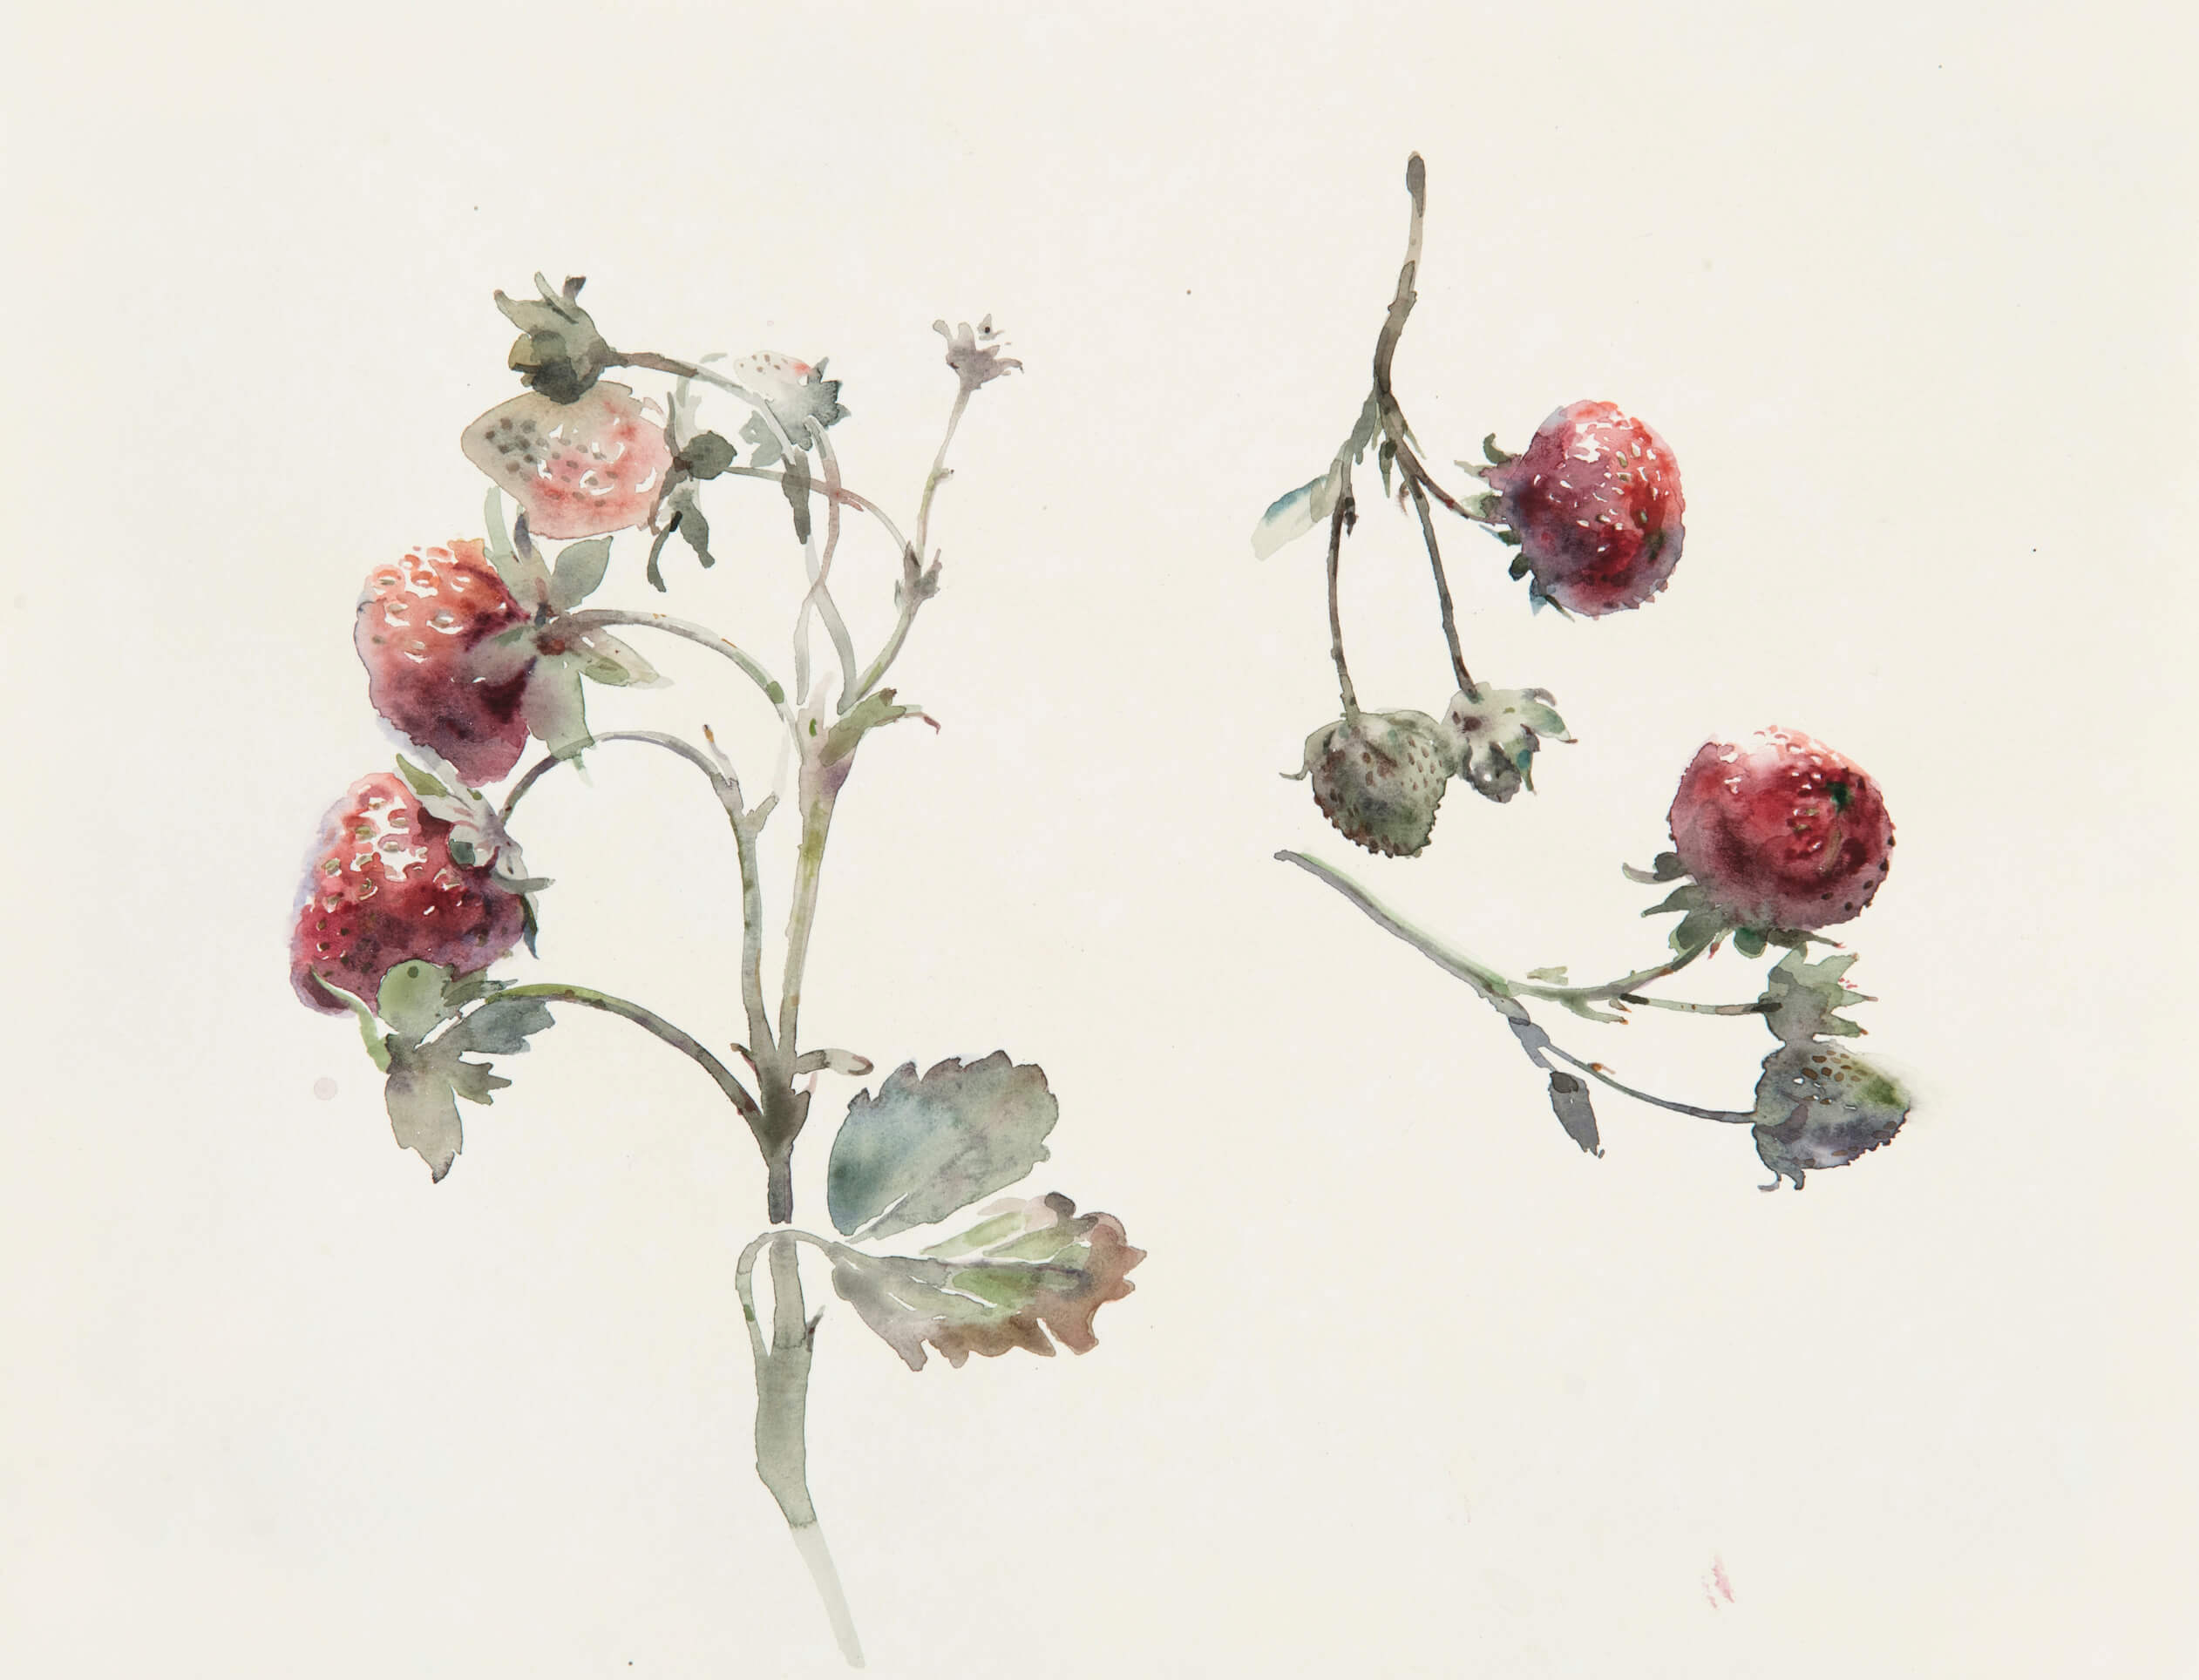 Watercolour painting of strawberries on stems by artist and tutor Wendy Artin for Clos Mirabel Ateliers.